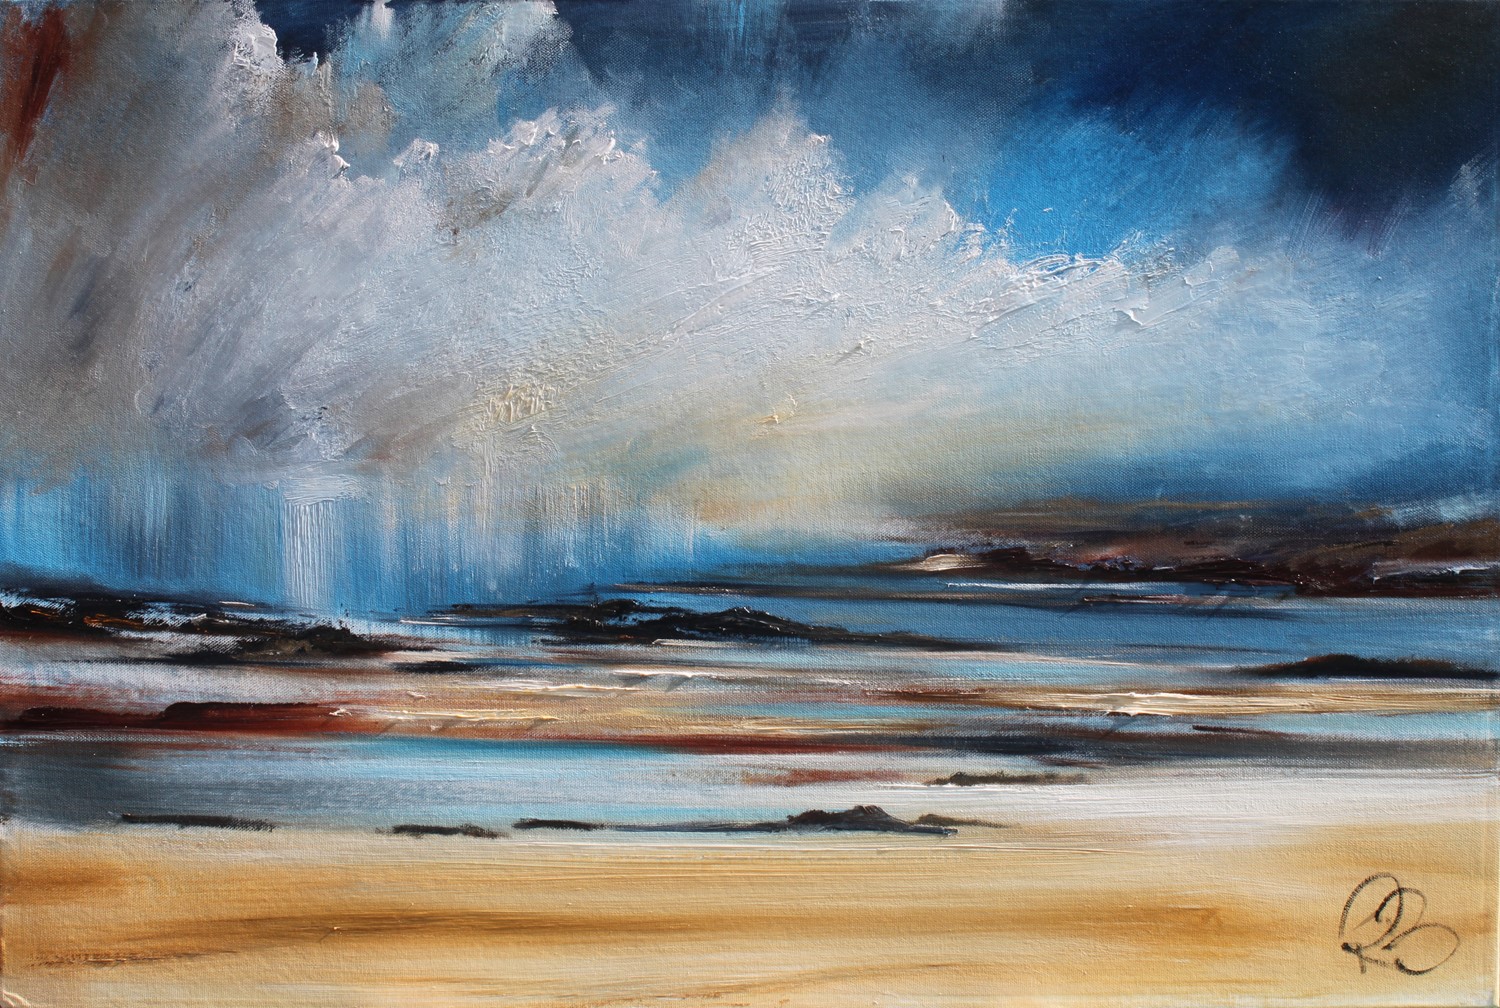 'The Gathering Storm ' by artist Rosanne Barr